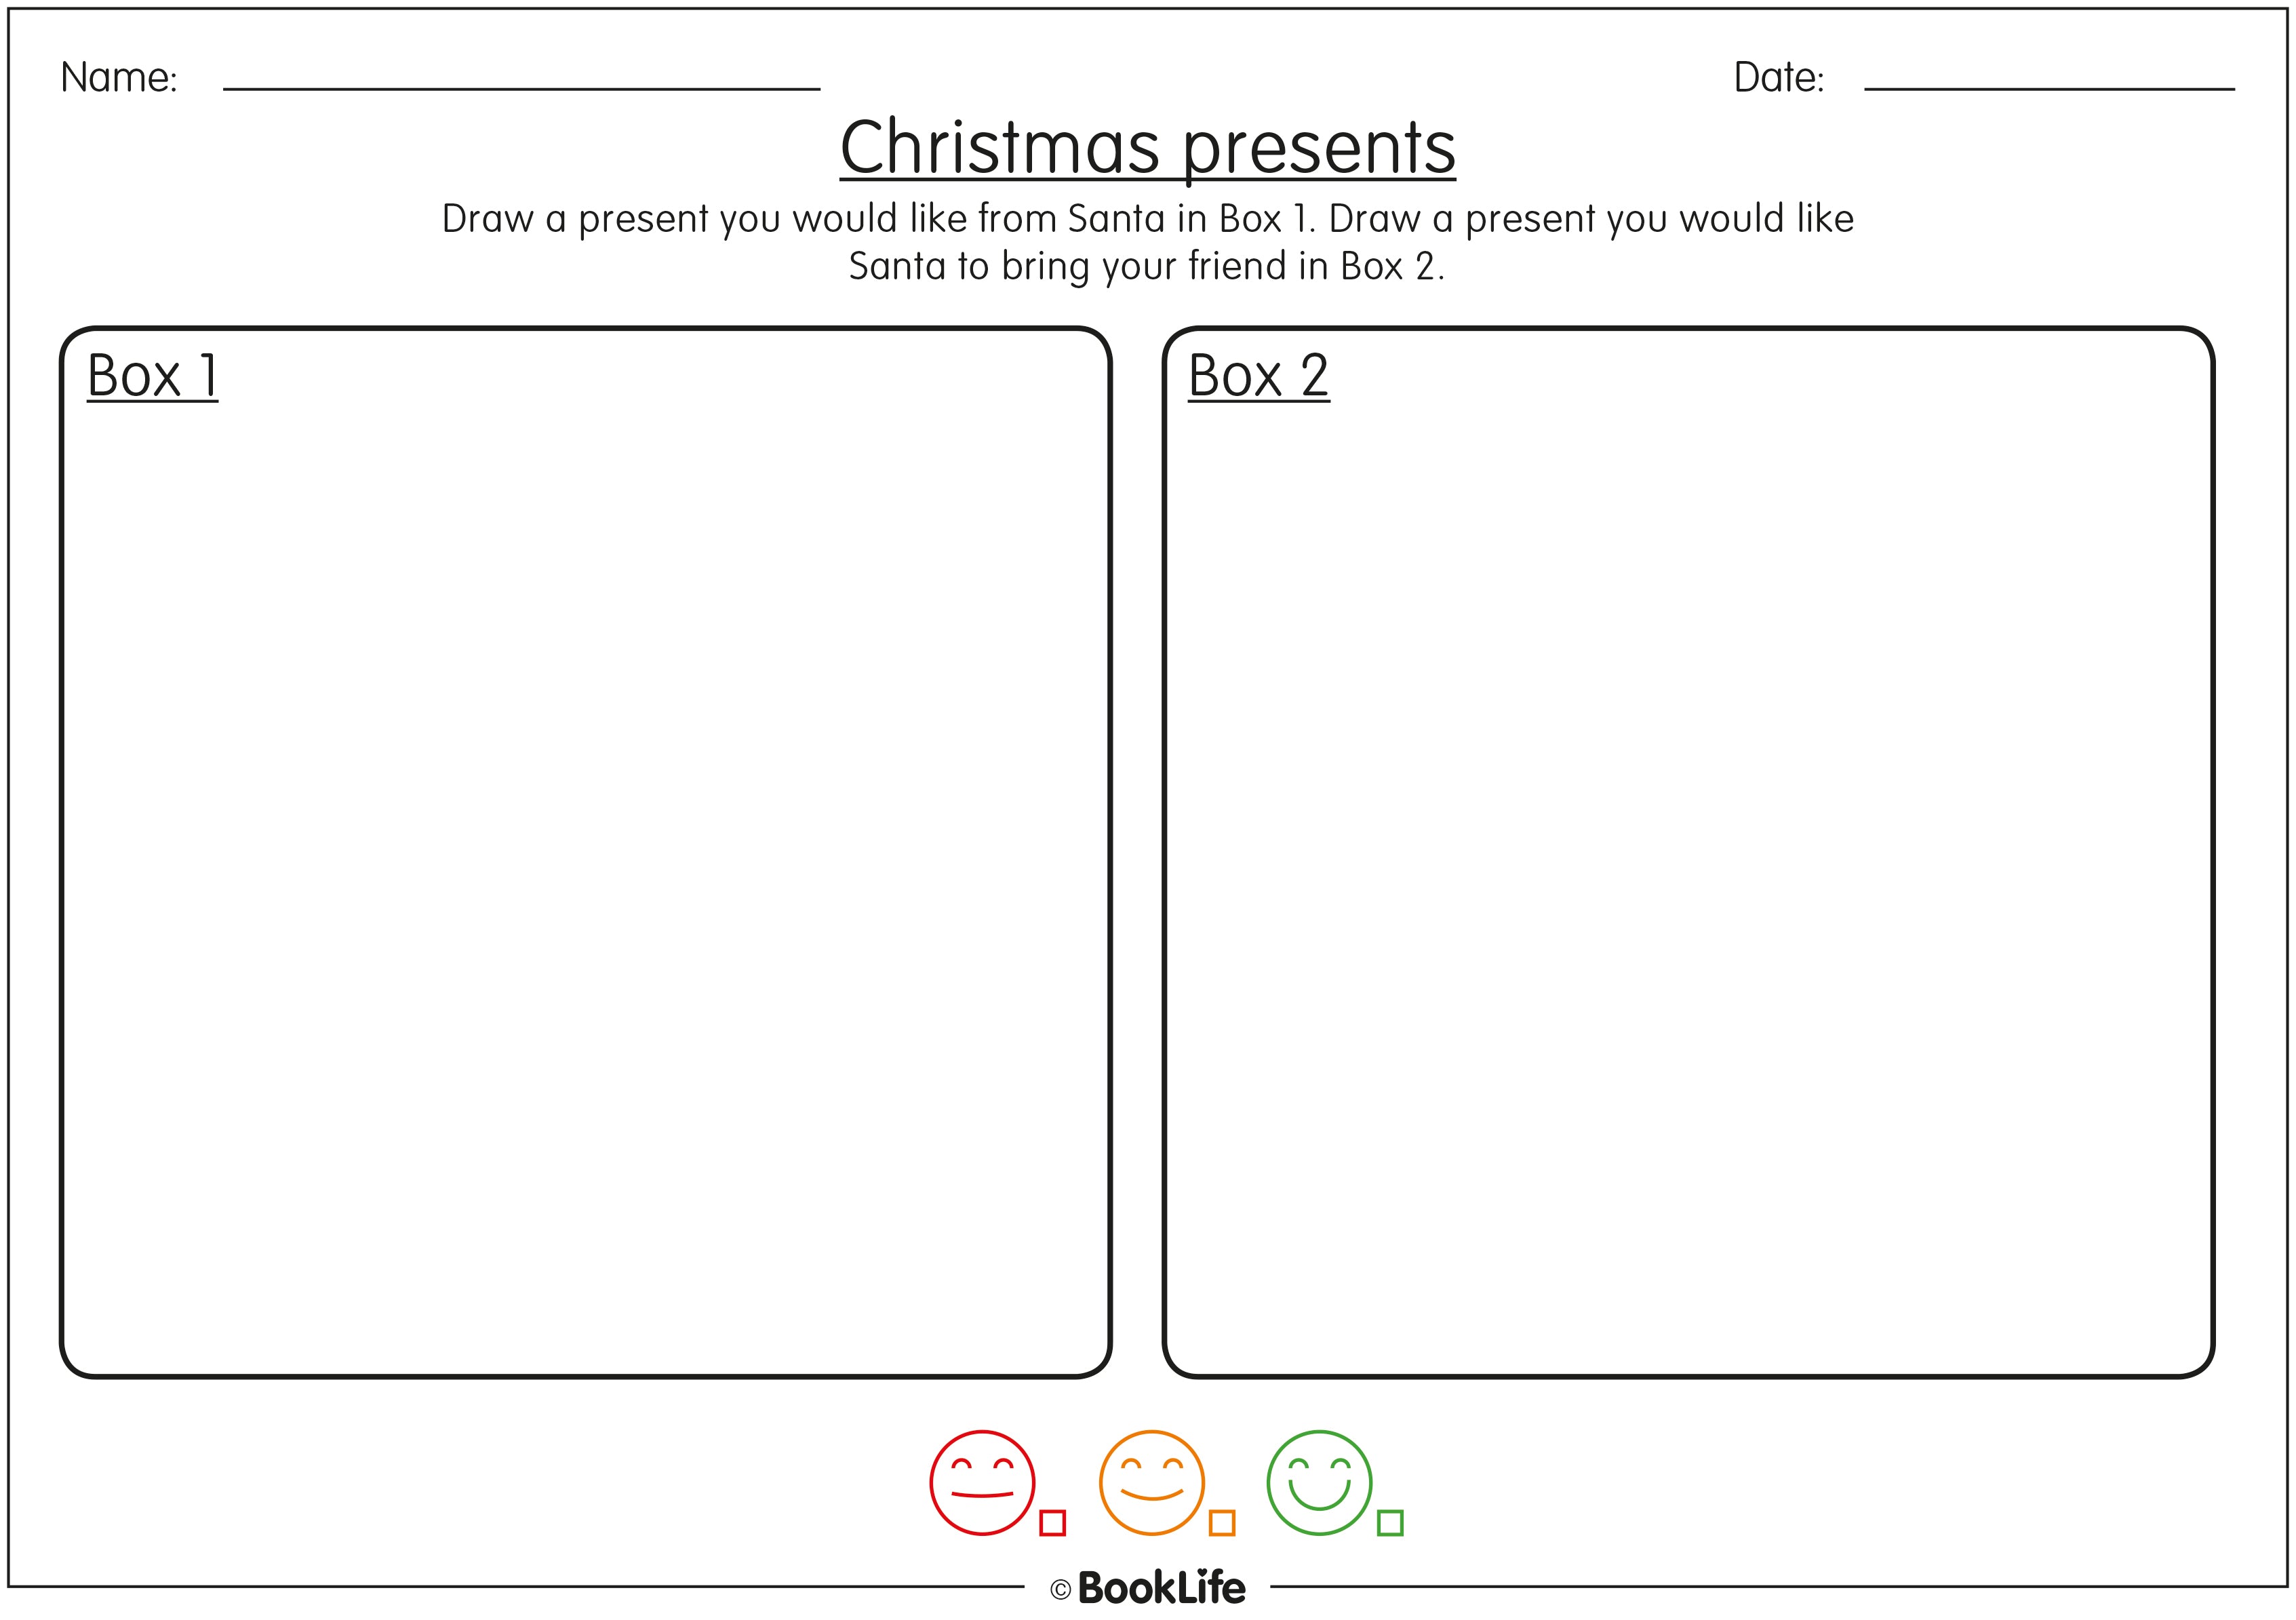 What My Friend And I Want For Christmas Activity Sheet by BookLife